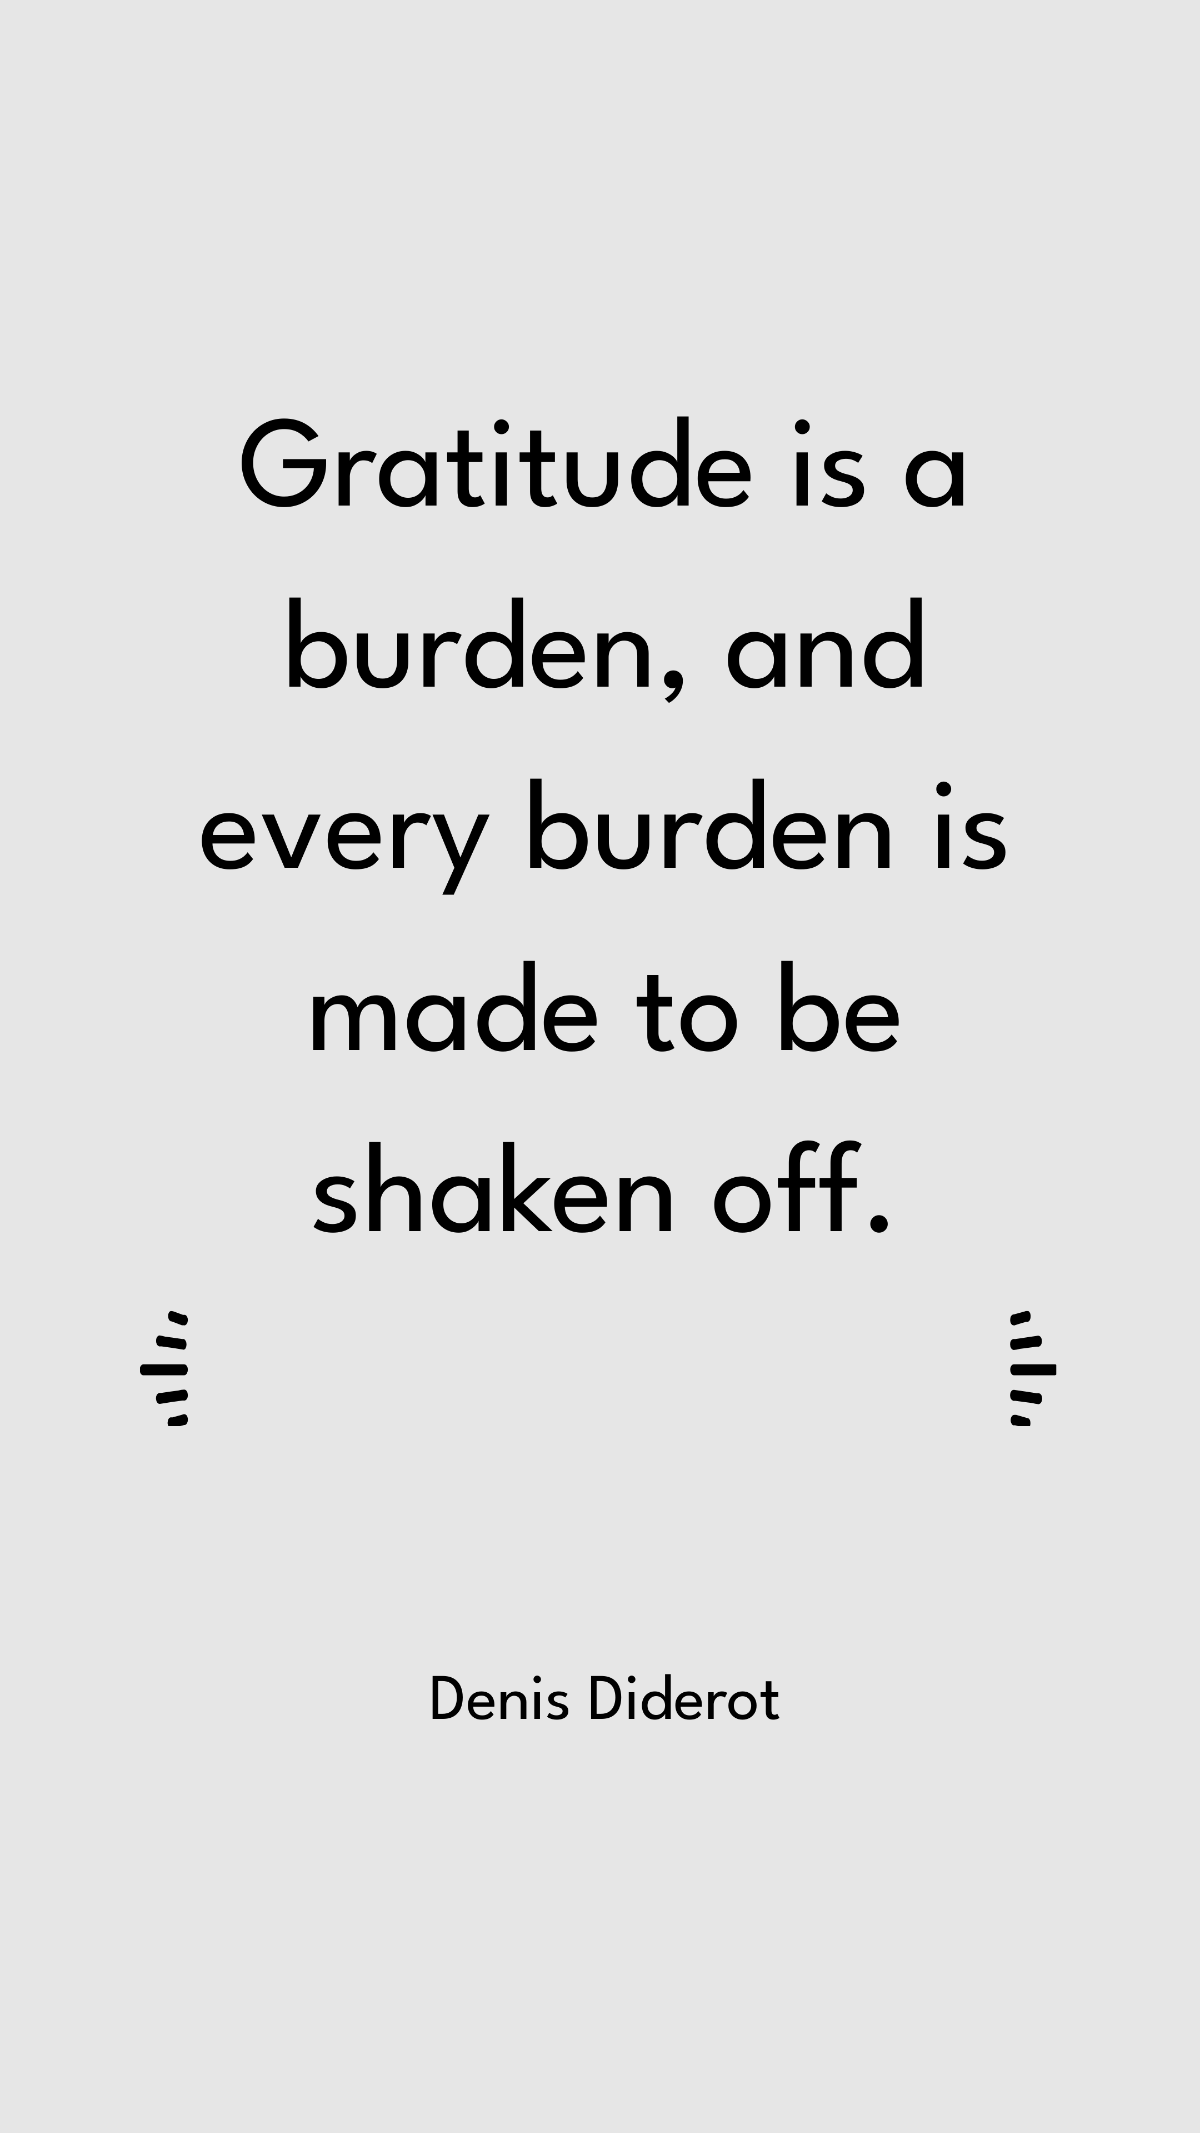 Denis Diderot - Gratitude is a burden, and every burden is made to be shaken off.